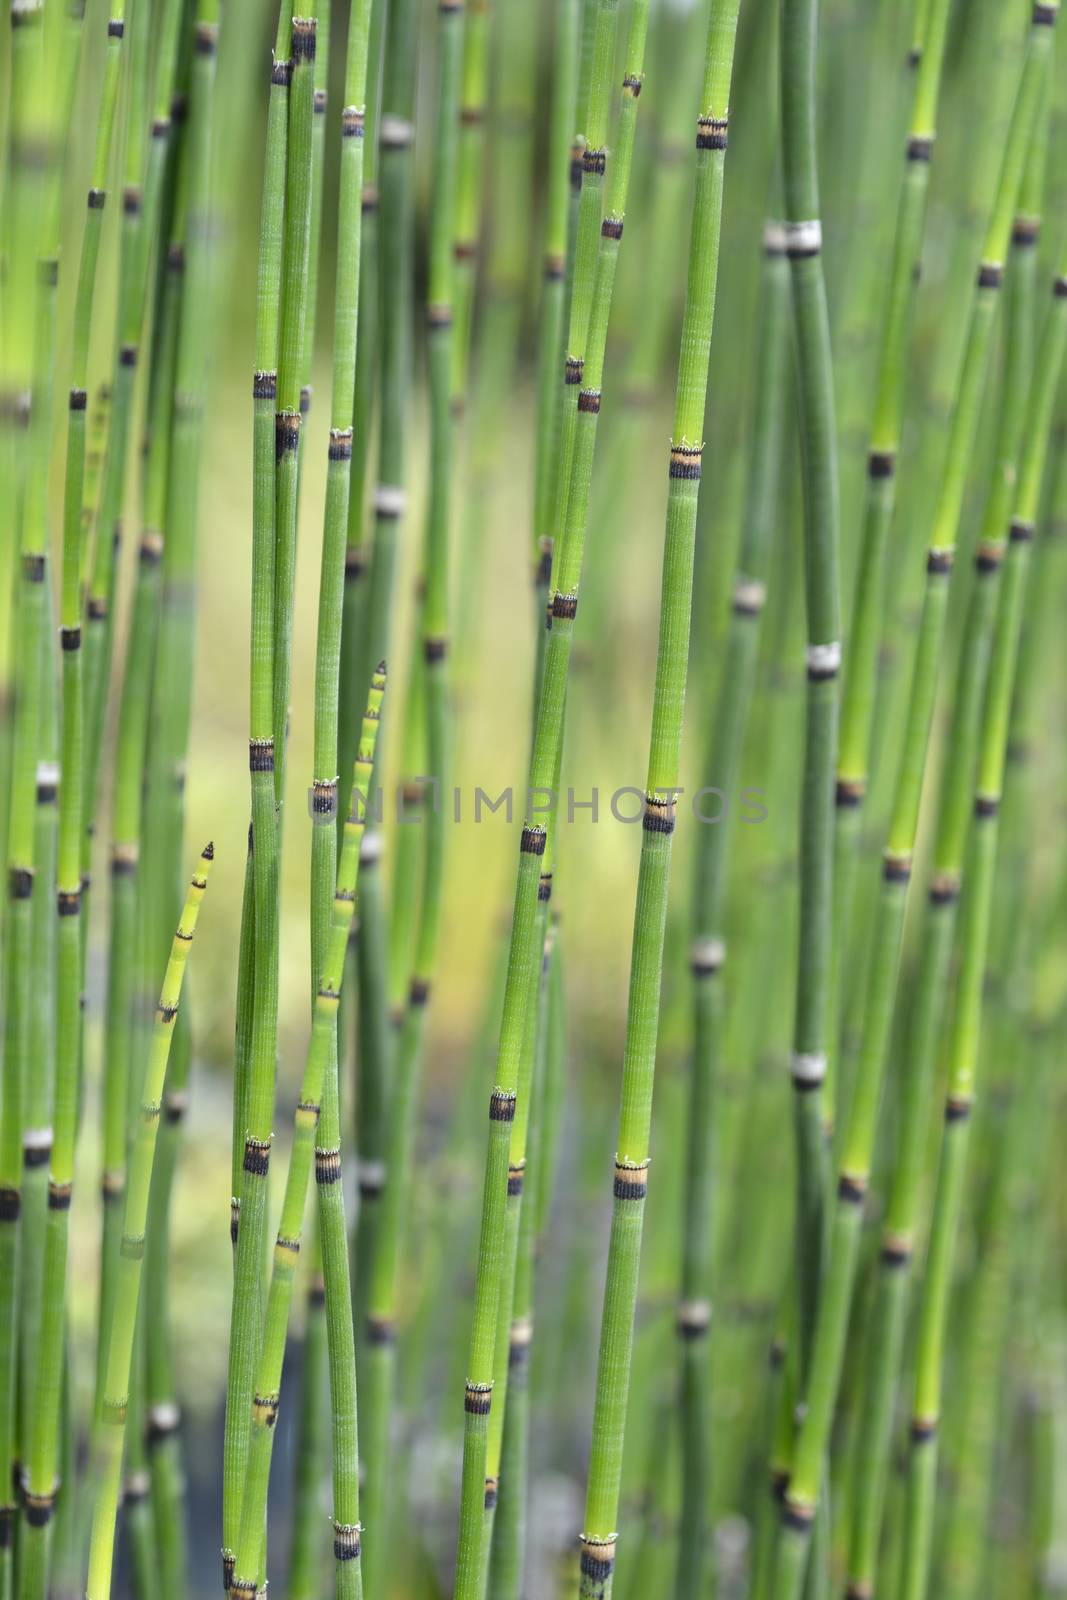 Scouring rush horsetail by nahhan